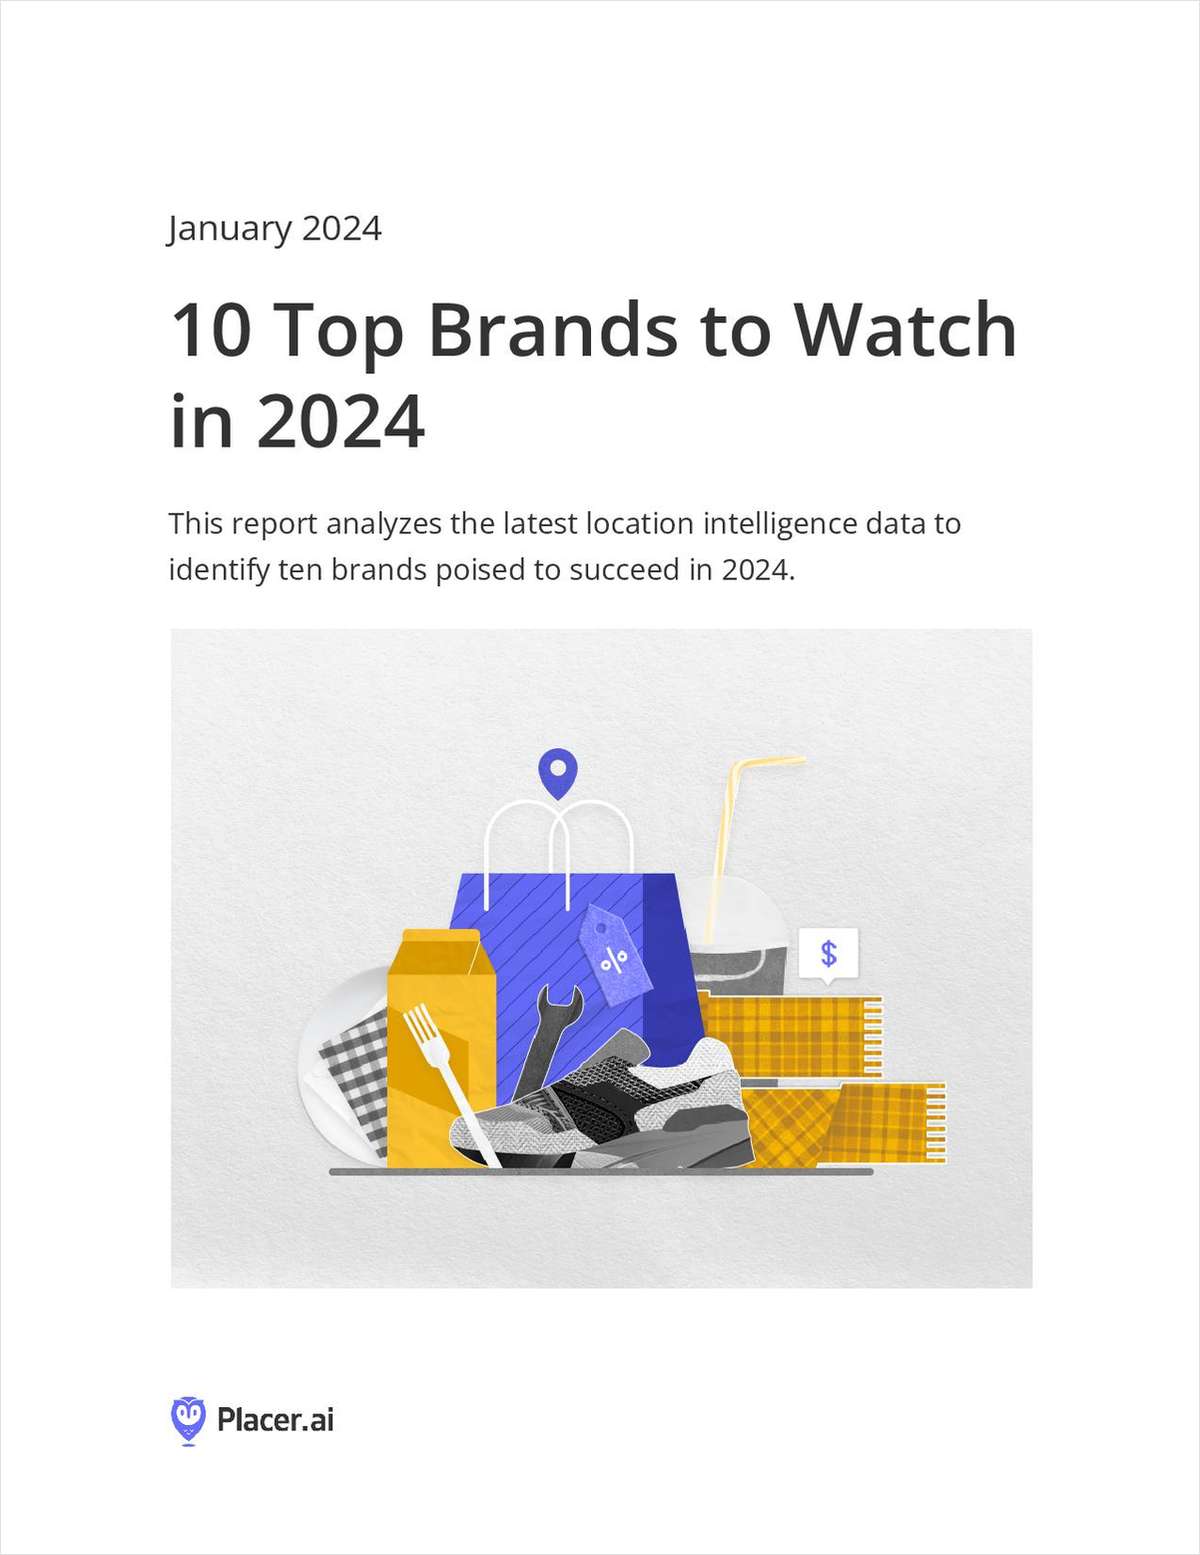 10 Top Brands to Watch in 2024